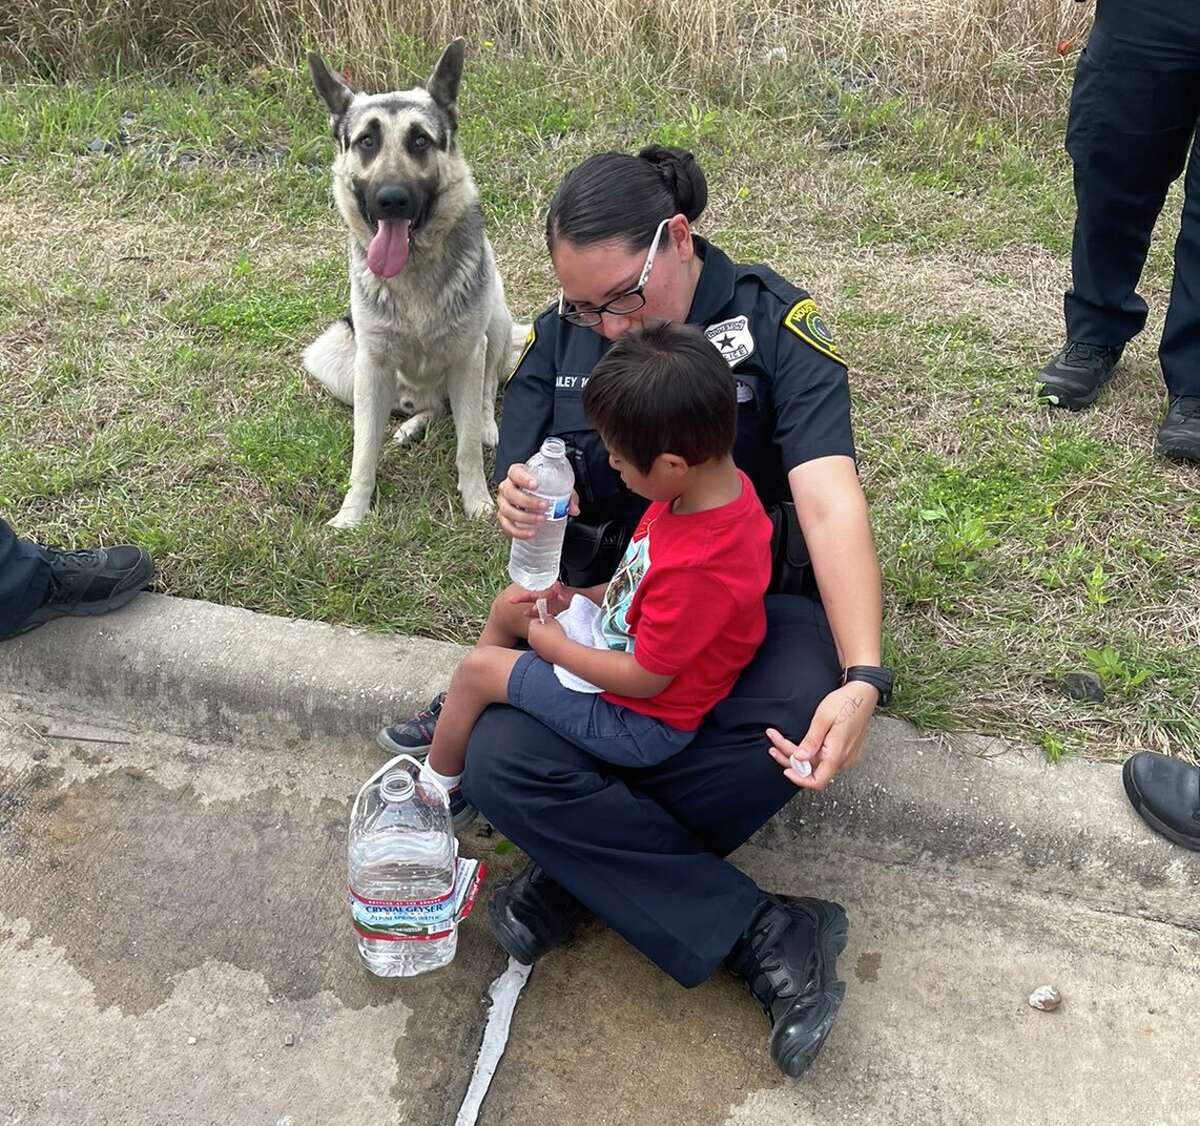 Jose, 5, walked along train tracks near Cavalcade and Elysian on Saturday, April 2, with his dog, Alejandro. HPD Sgt. Ricardo Salas believes Alejandro would have saved Jose's life.